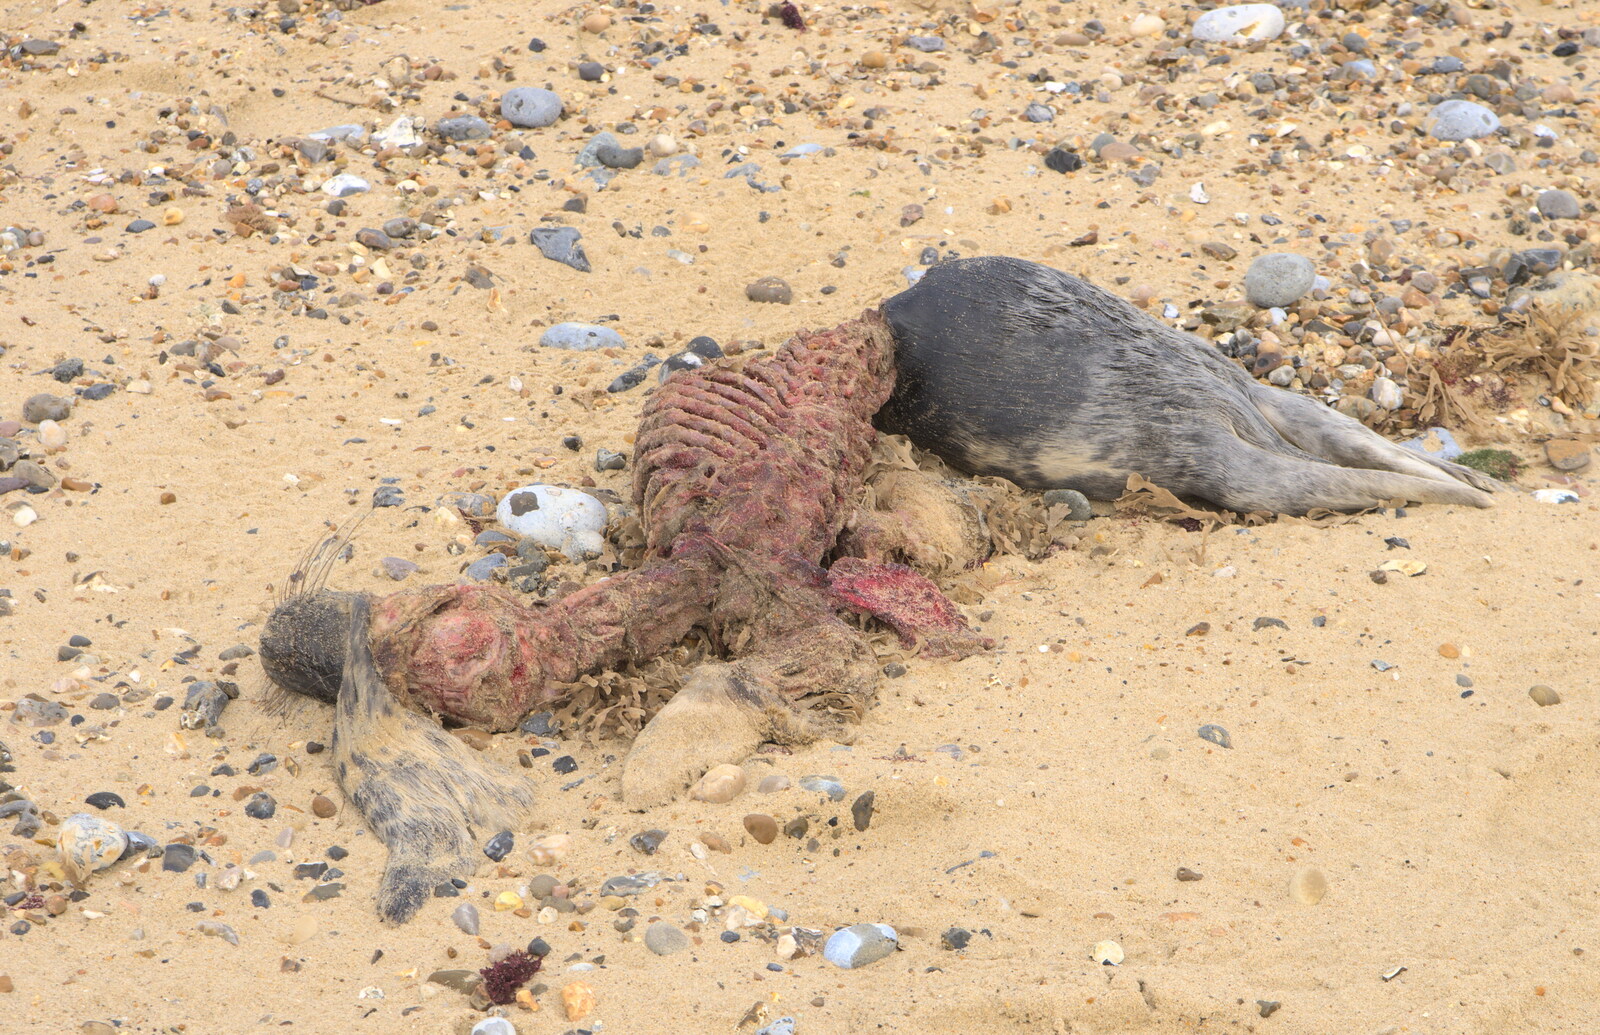 Seal-watching starts bleakly with a dead seal from The Seals of Horsey Gap, Norfolk - 21st February 2016